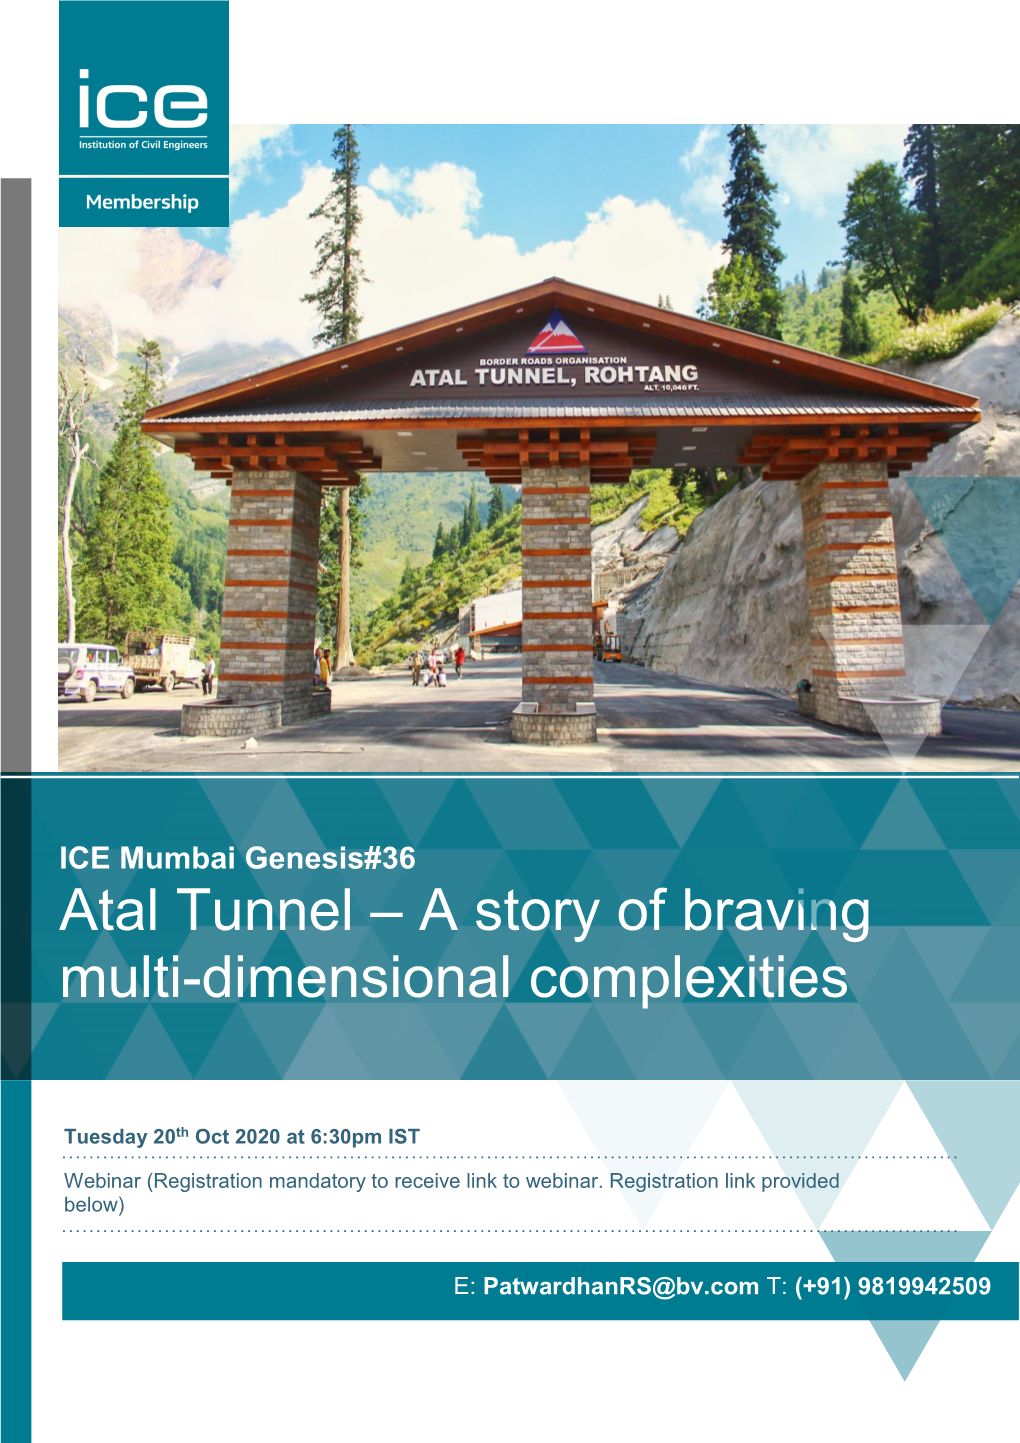 Atal Tunnel – a Story of Braving Multi-Dimensional Complexities